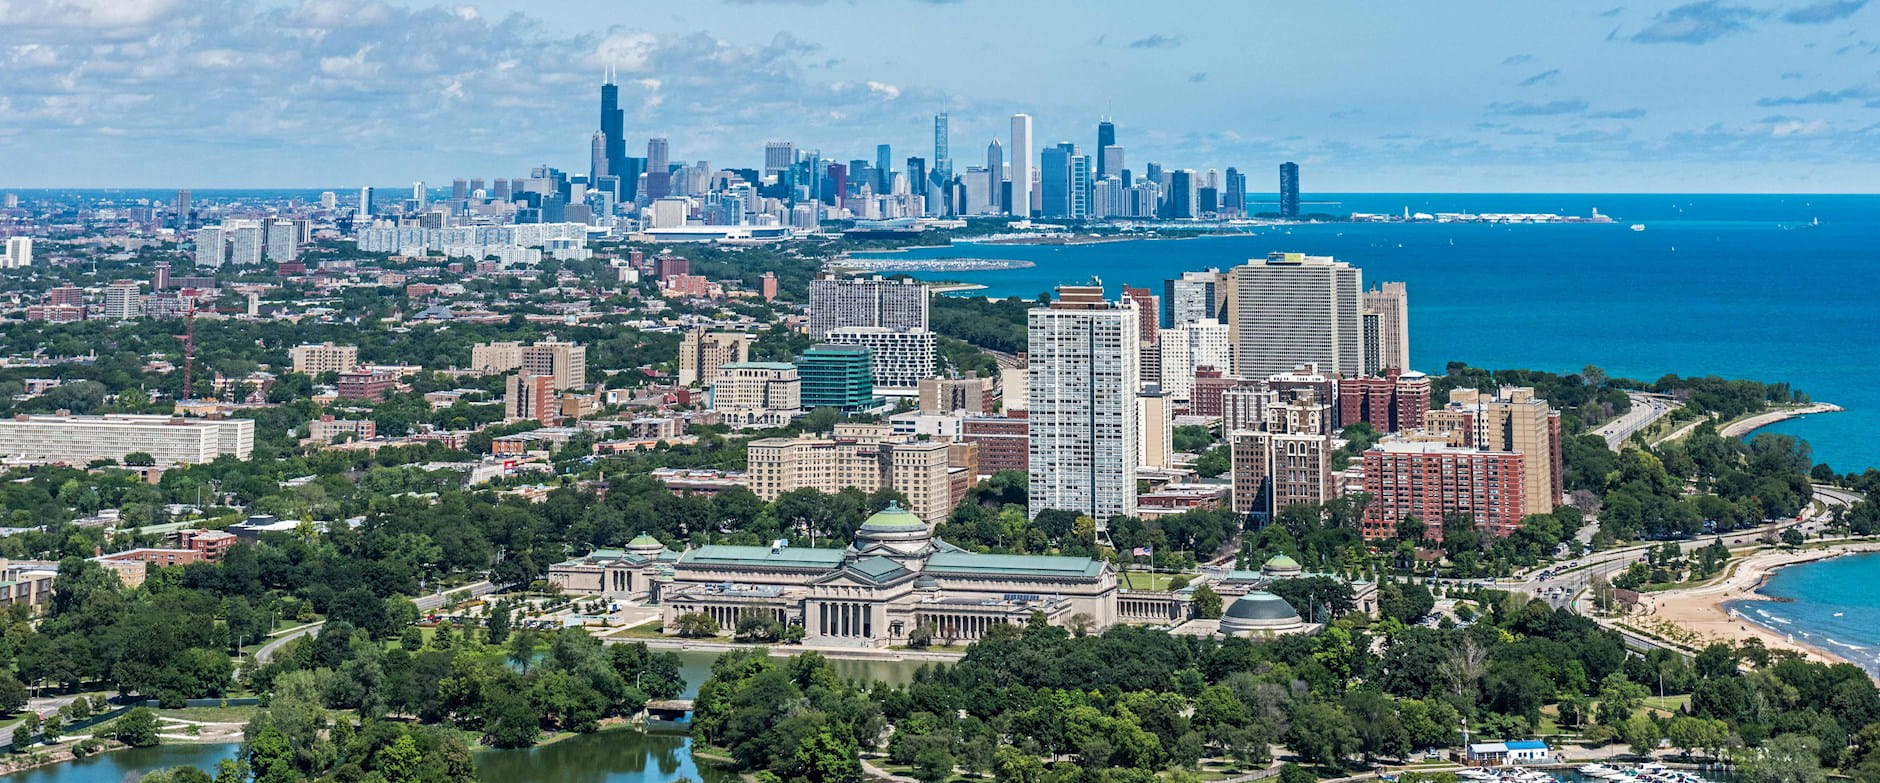 Skyline of Chicago from the south featuring the Museum of Science and Industry in the foreground